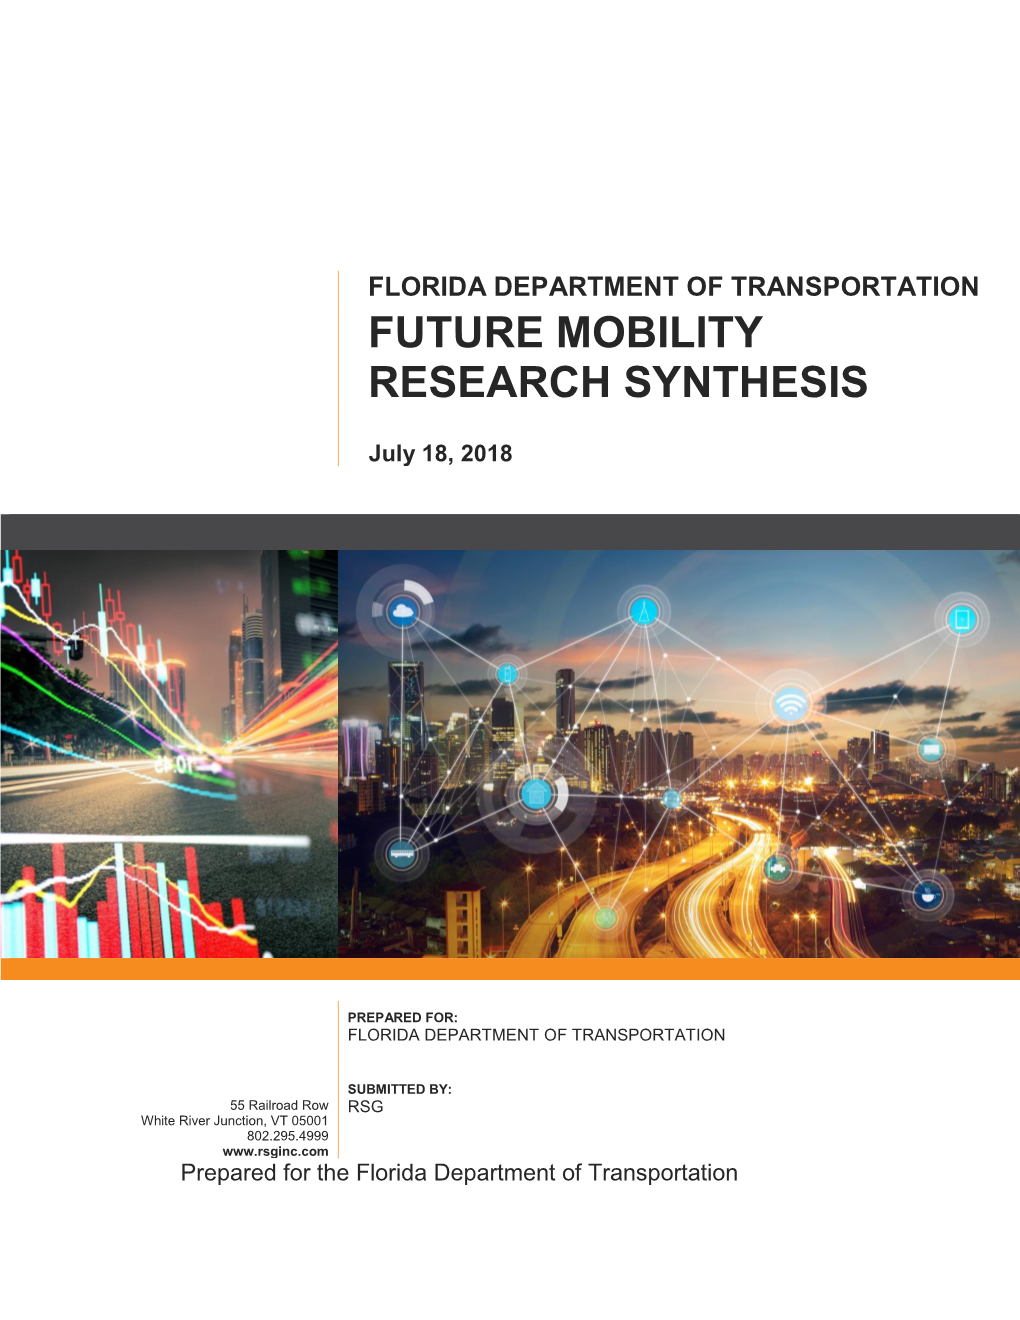 Florida Department of Transportation Future Mobility Research Synthesis